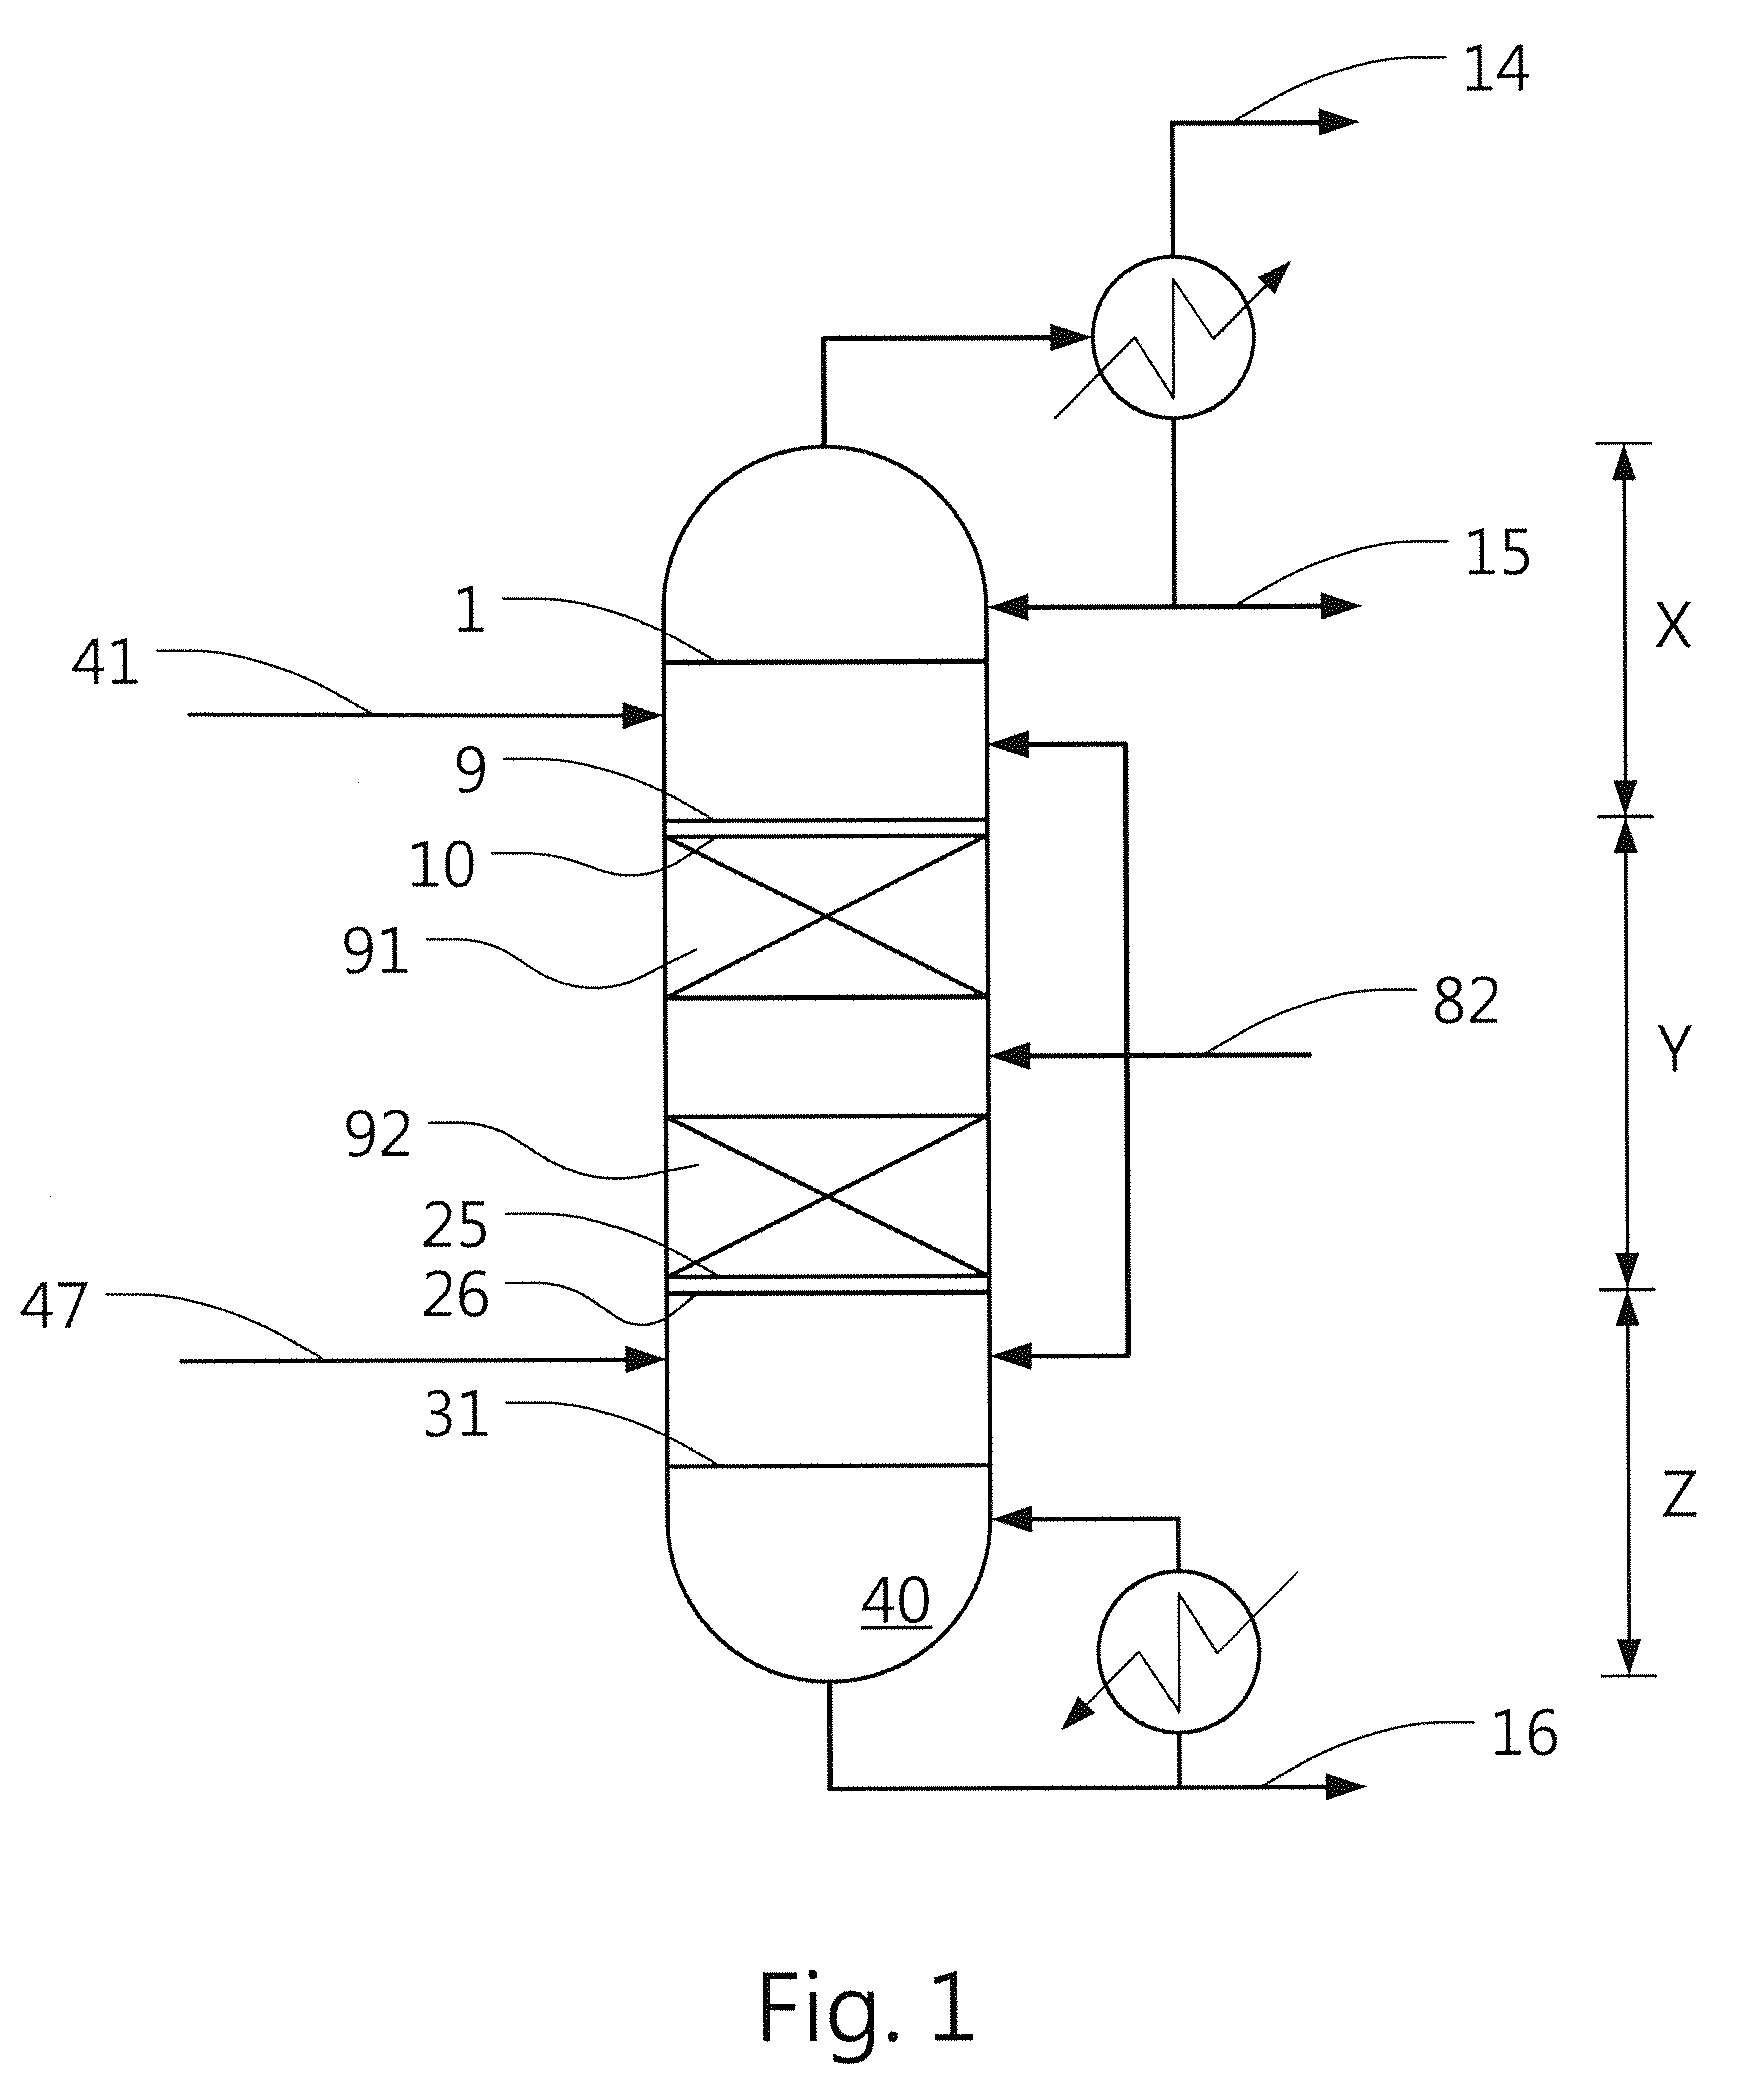 Method for coproducing isobutene and MTBE from tert-butanol mixture in a catalytic distillation column